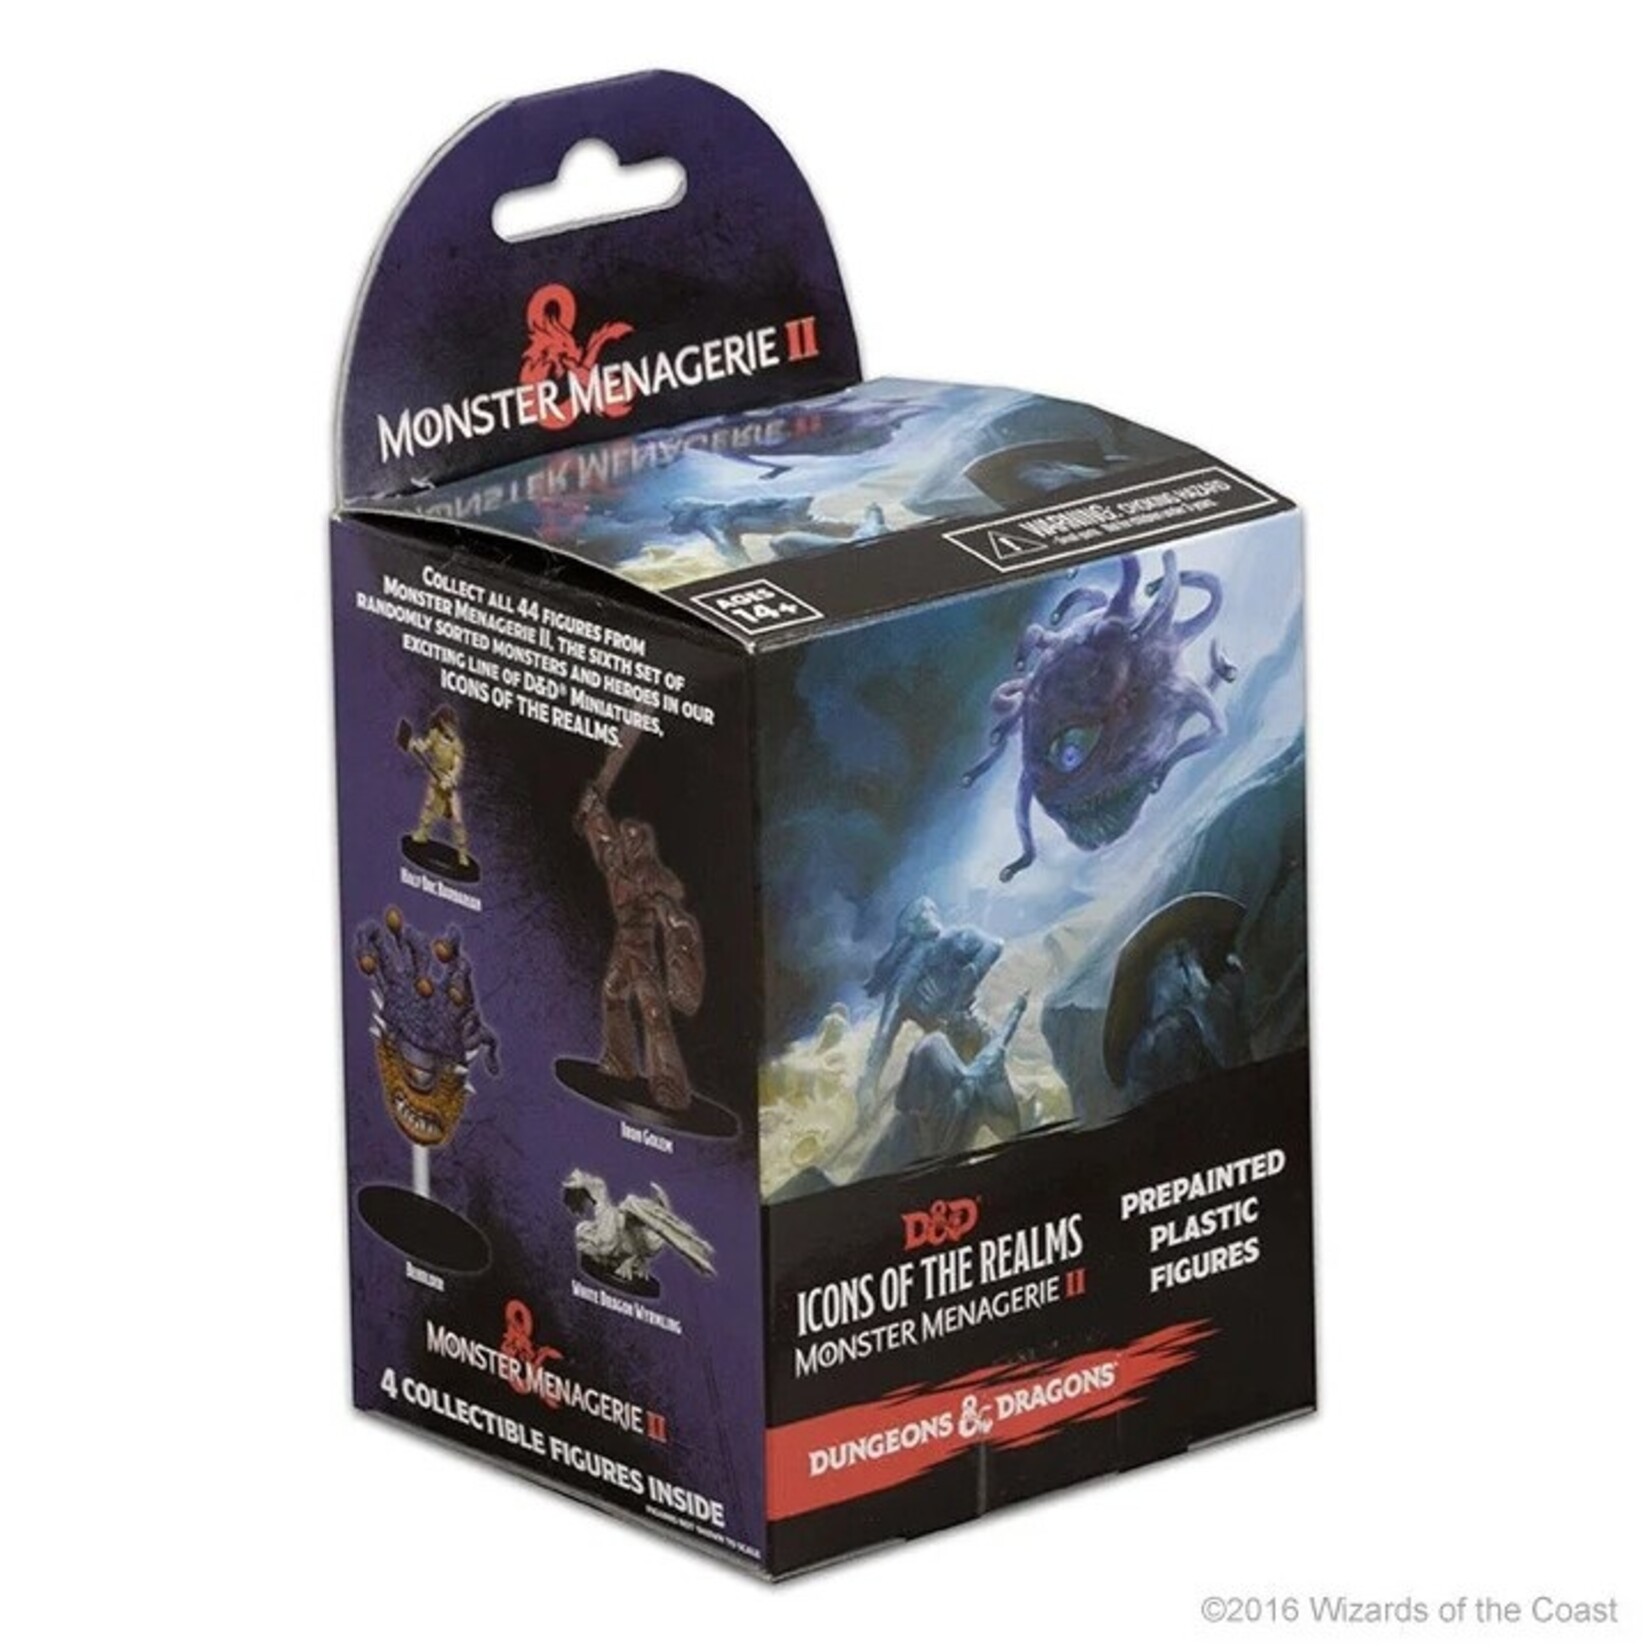 Wizkids D&D Icons of the Realms Monster Menagerie II Booster